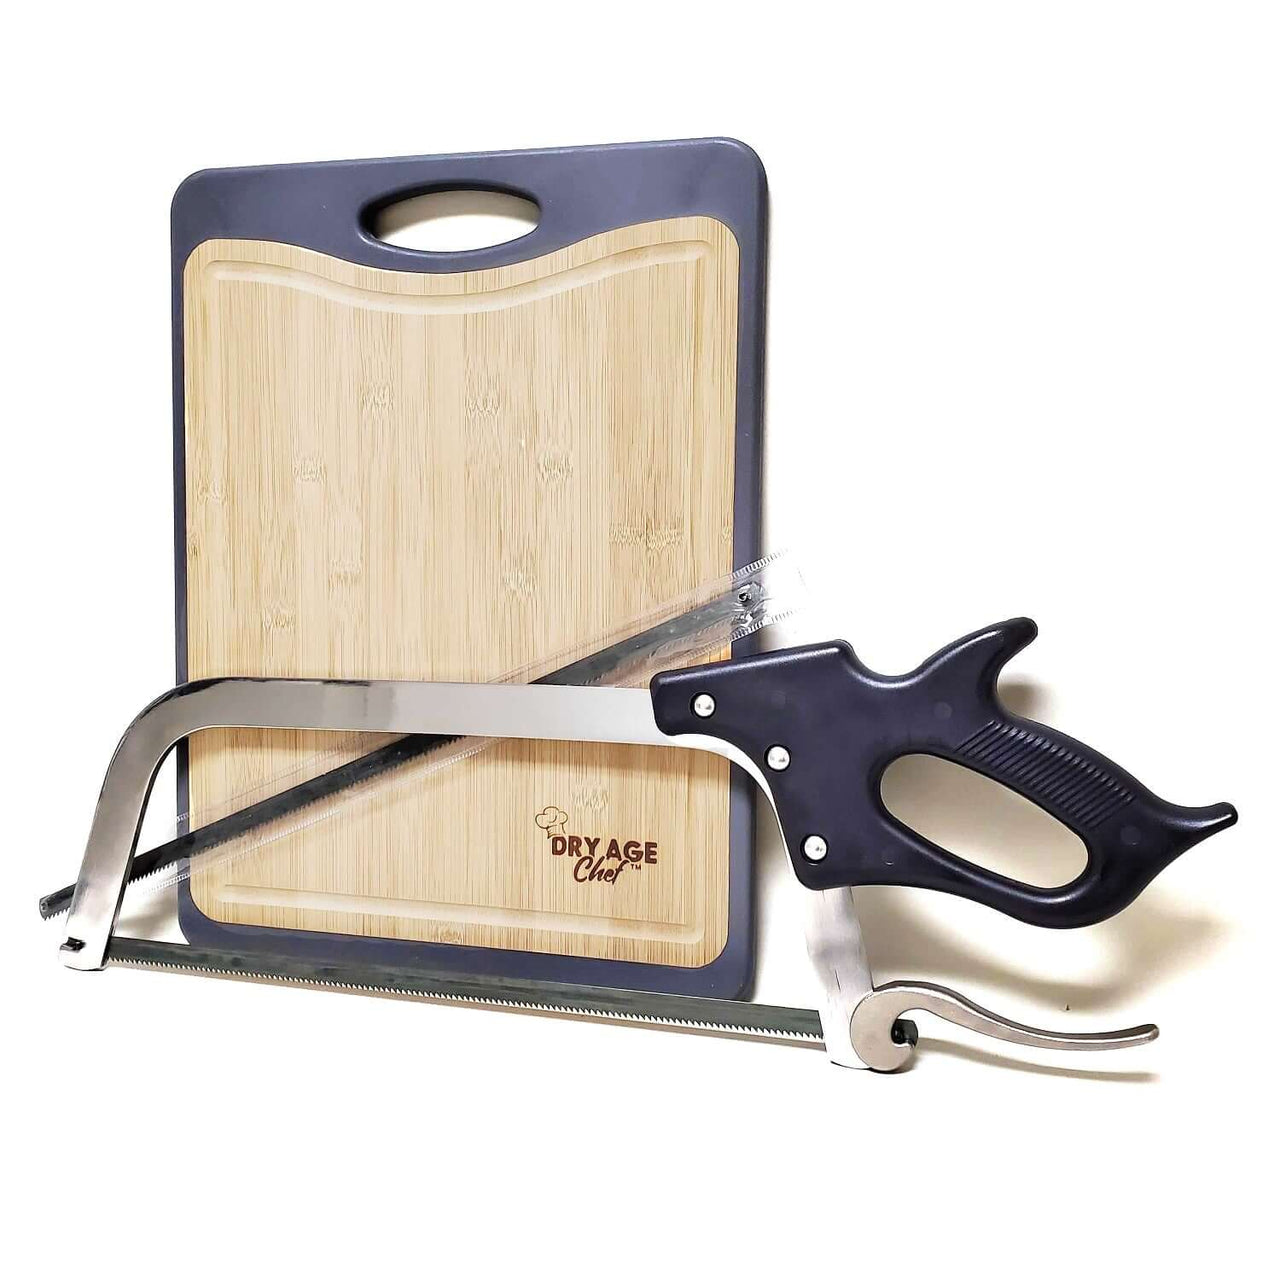 Dry Age Chef 16" Stainless Steel Butcher Hand Saw, Replacement Blade and Hybrid Cutting Board